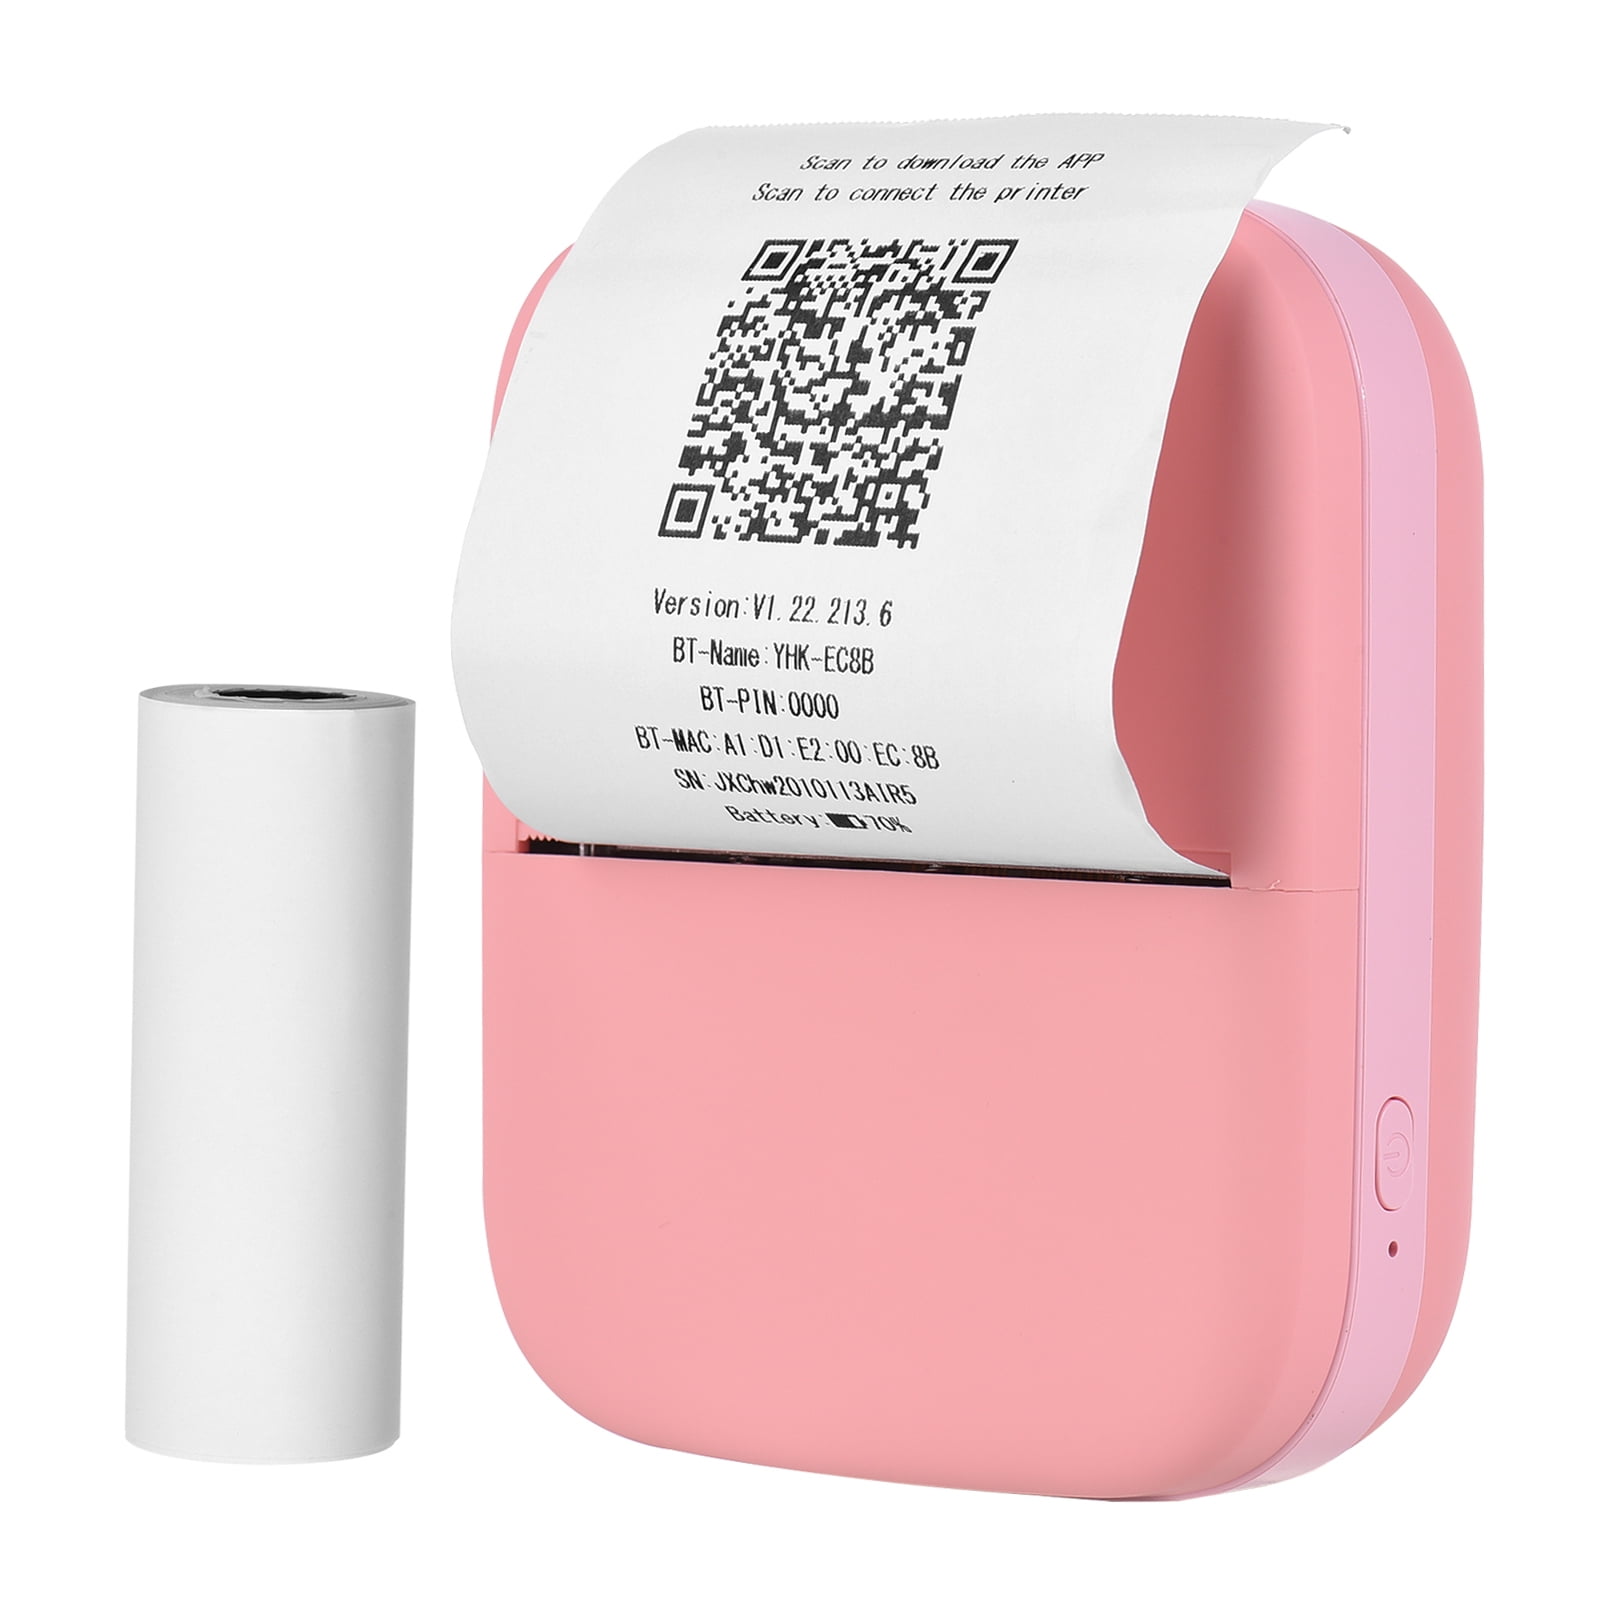 Andriod phone Mini Wireless Printer For Printing Stickers,Images,Notes,Lists,Compatible with iOS Thermal Sticker Printer 